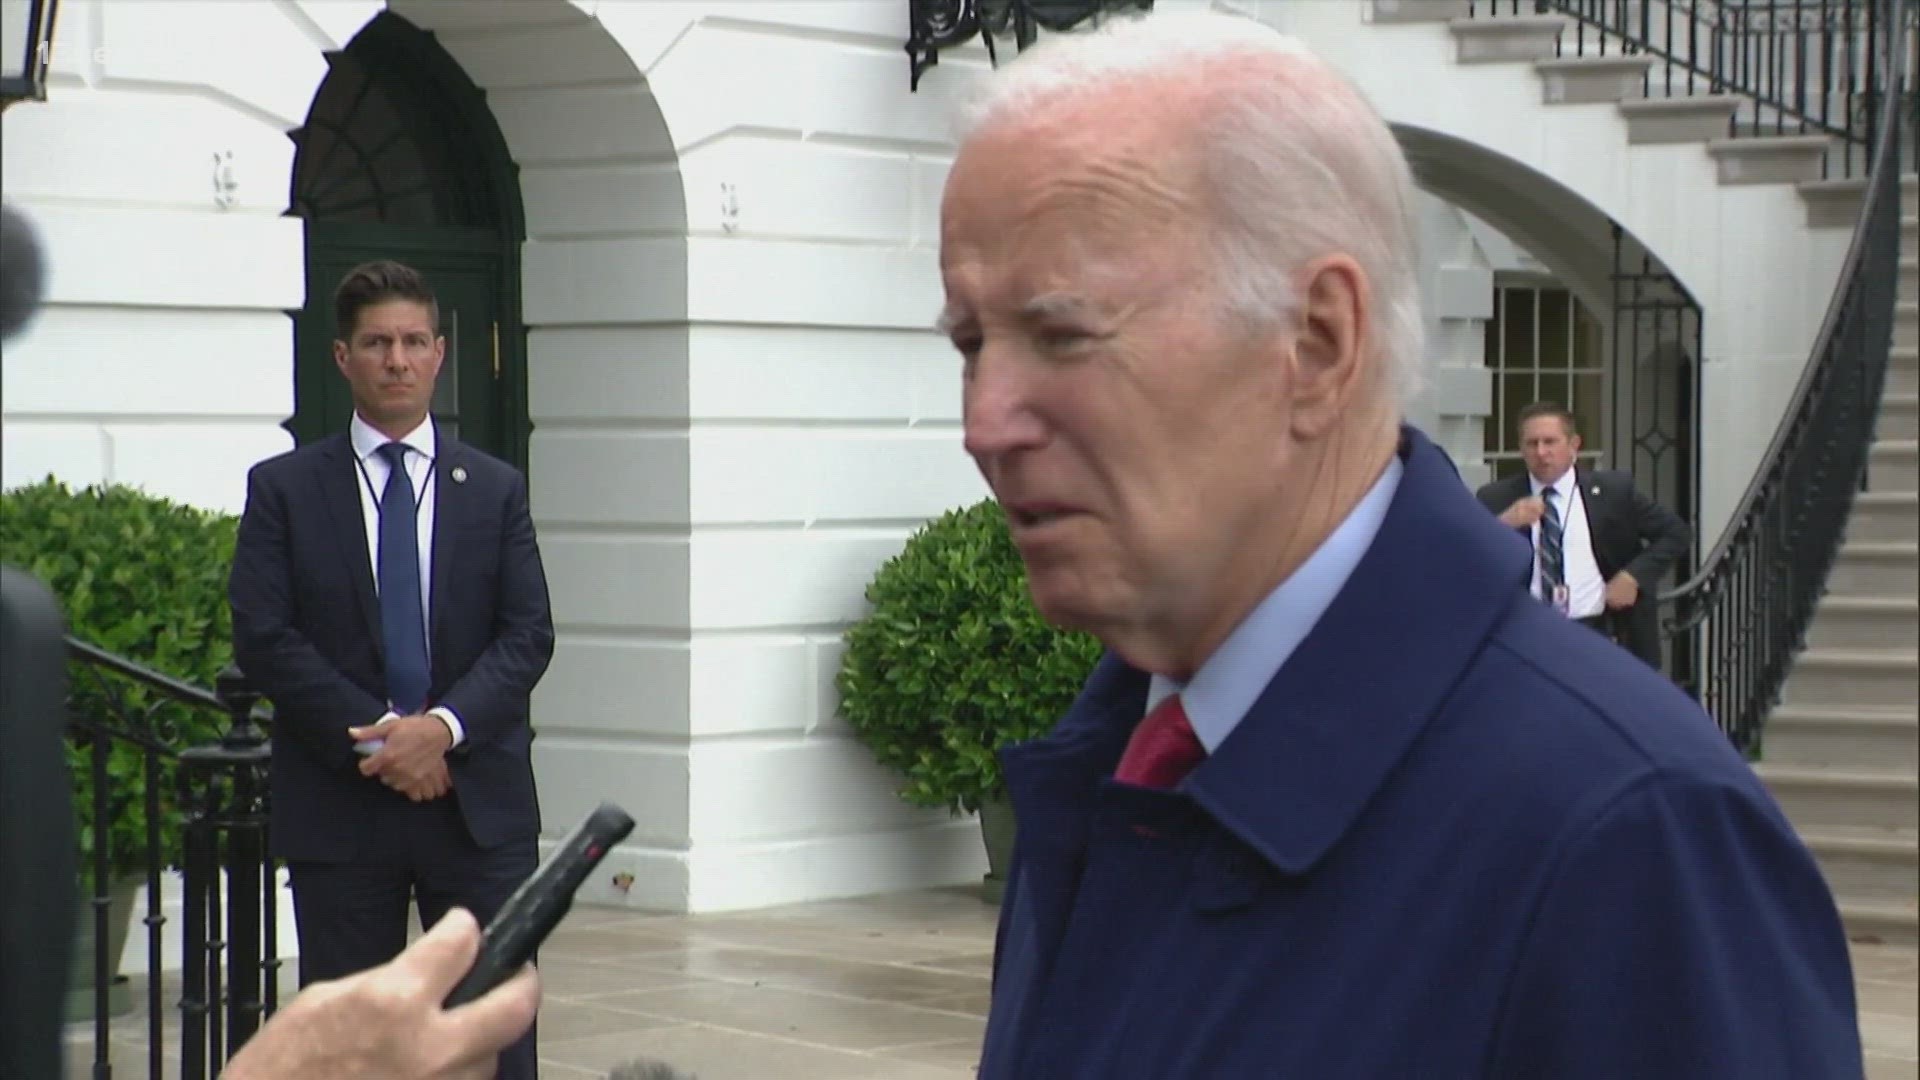 President Biden and House Speaker Kevin McCarthy are now working to win enough votes of Congressional members to pass the bill to raise the debt ceiling.